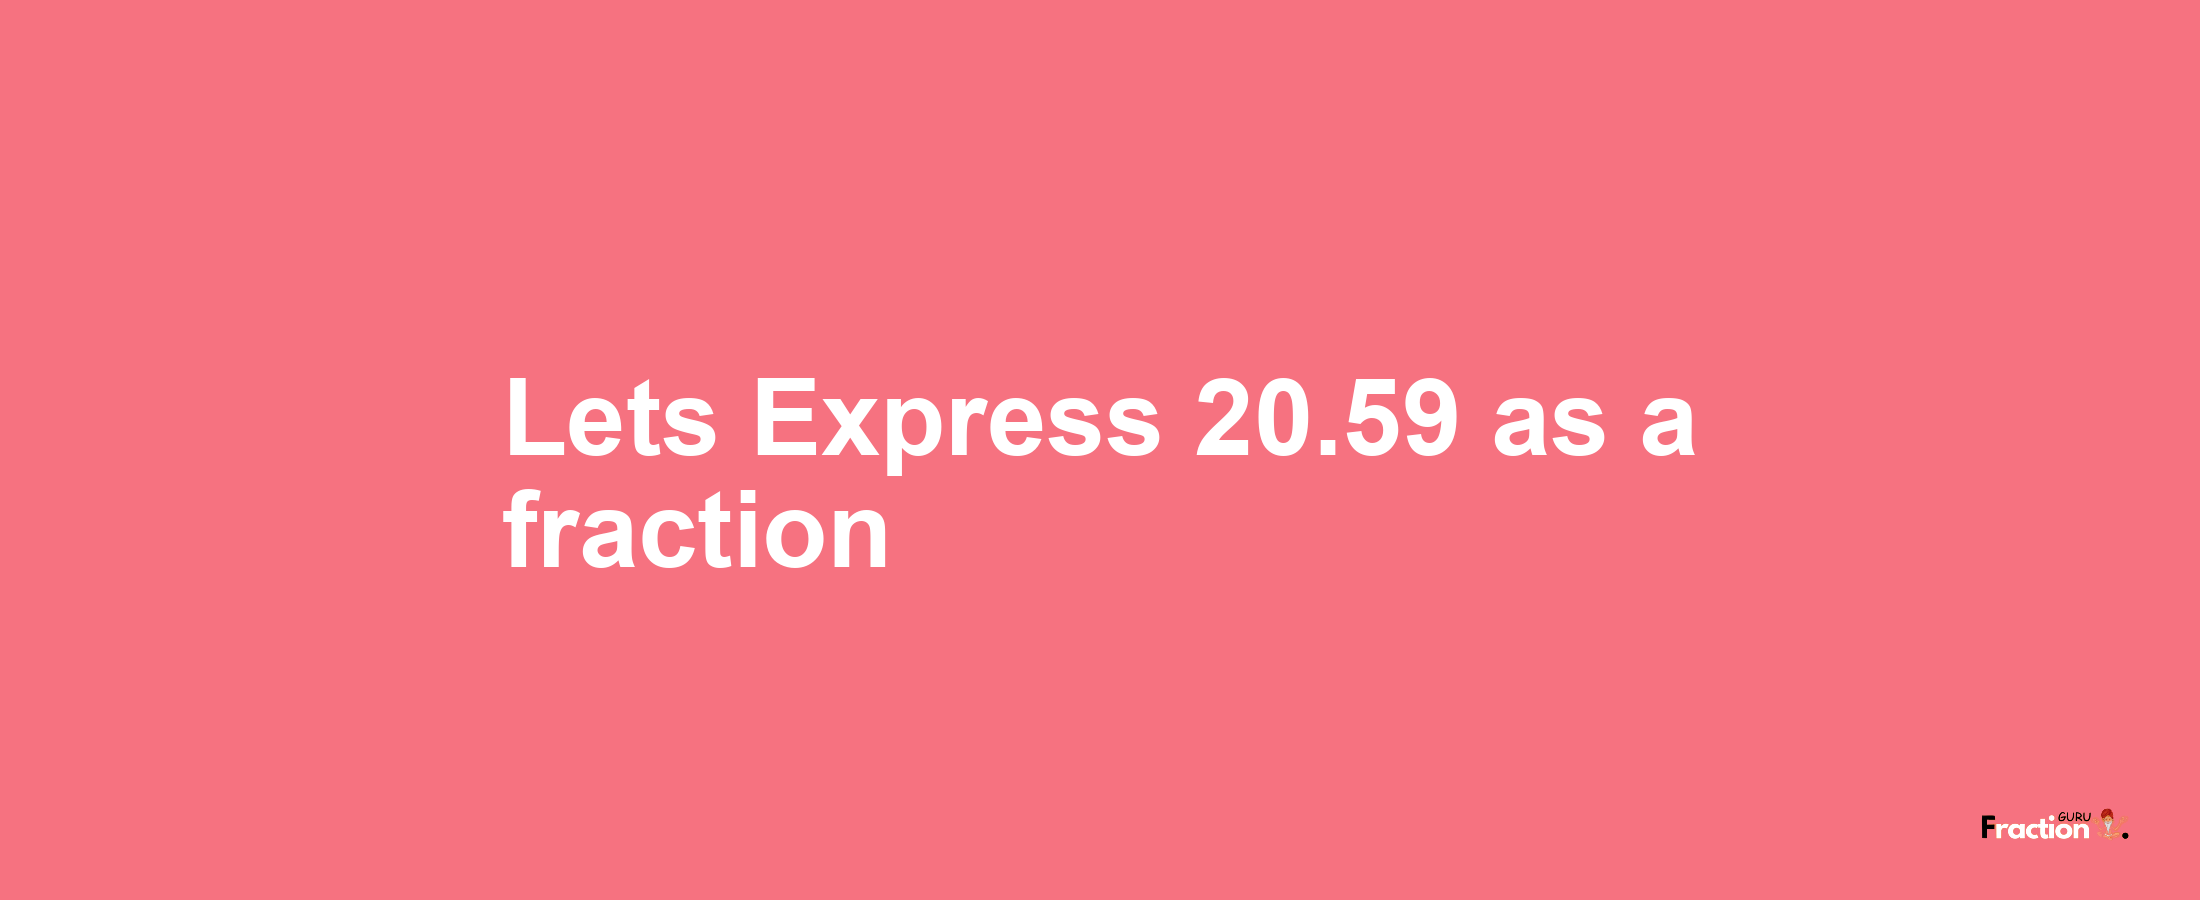 Lets Express 20.59 as afraction